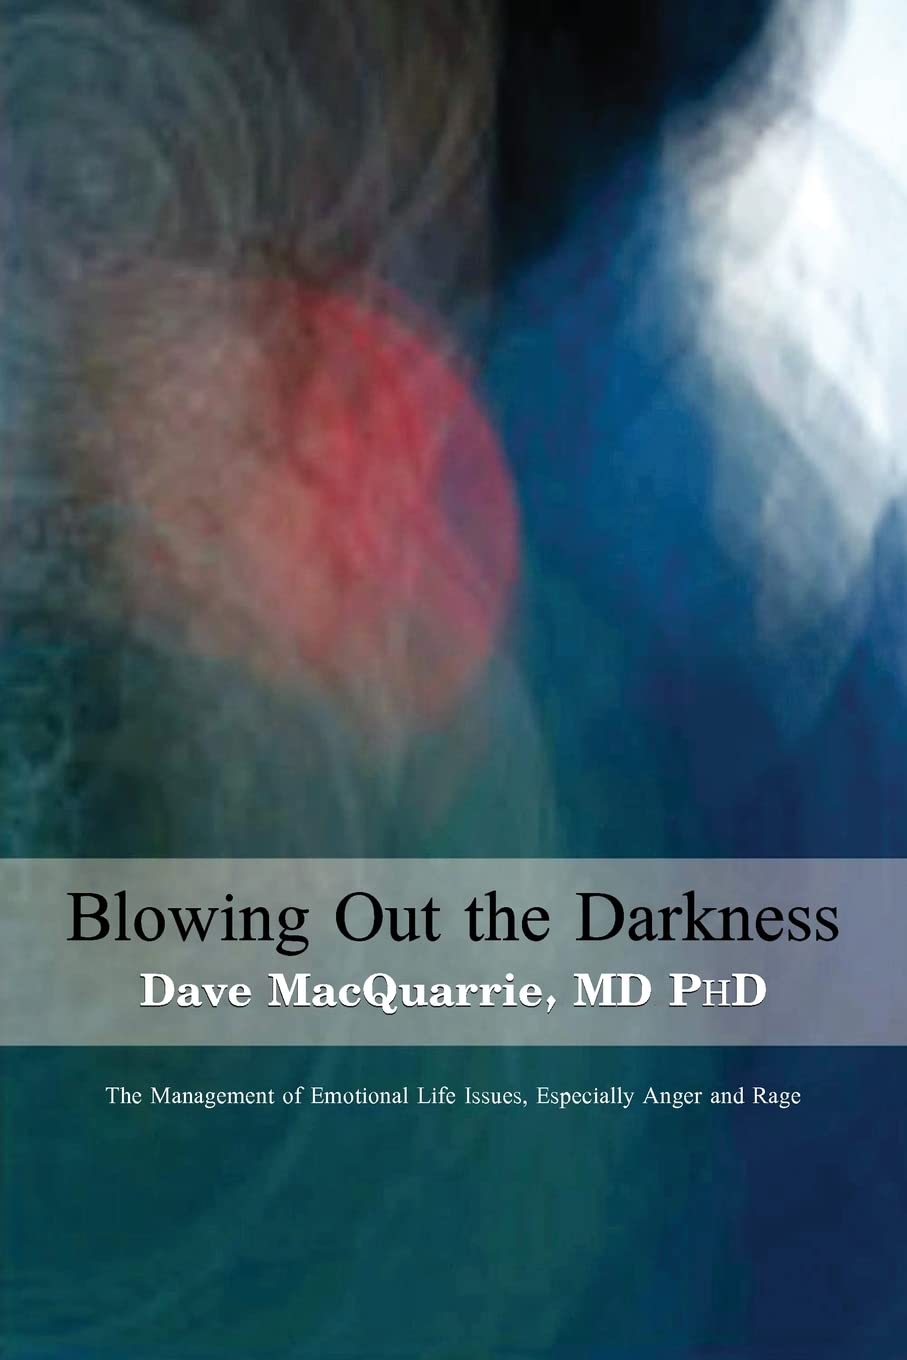 Blowing Out the Darkness